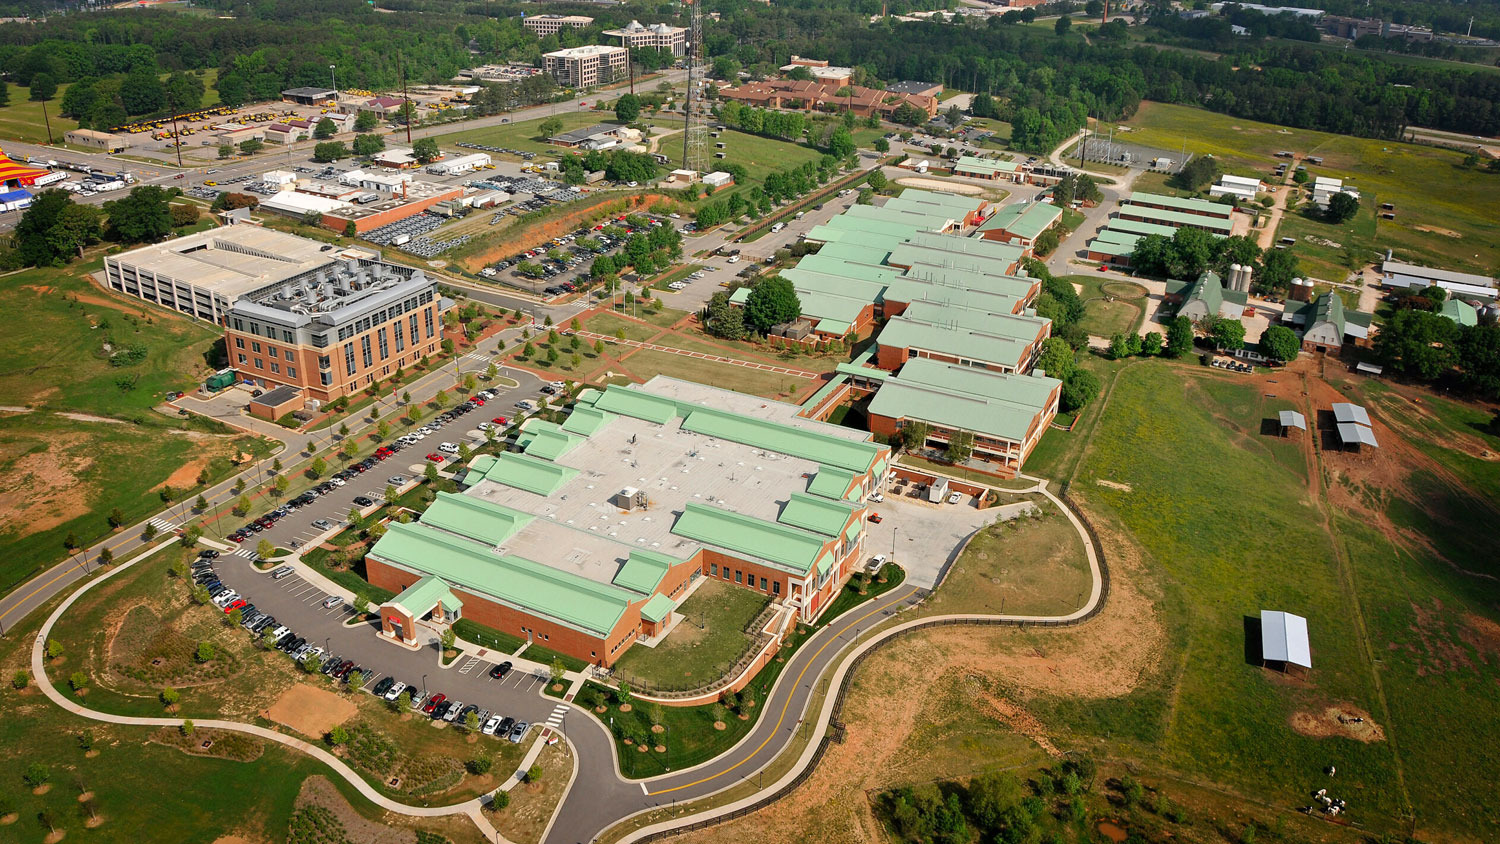 An aerial view of the College of Veterinary Medicine.